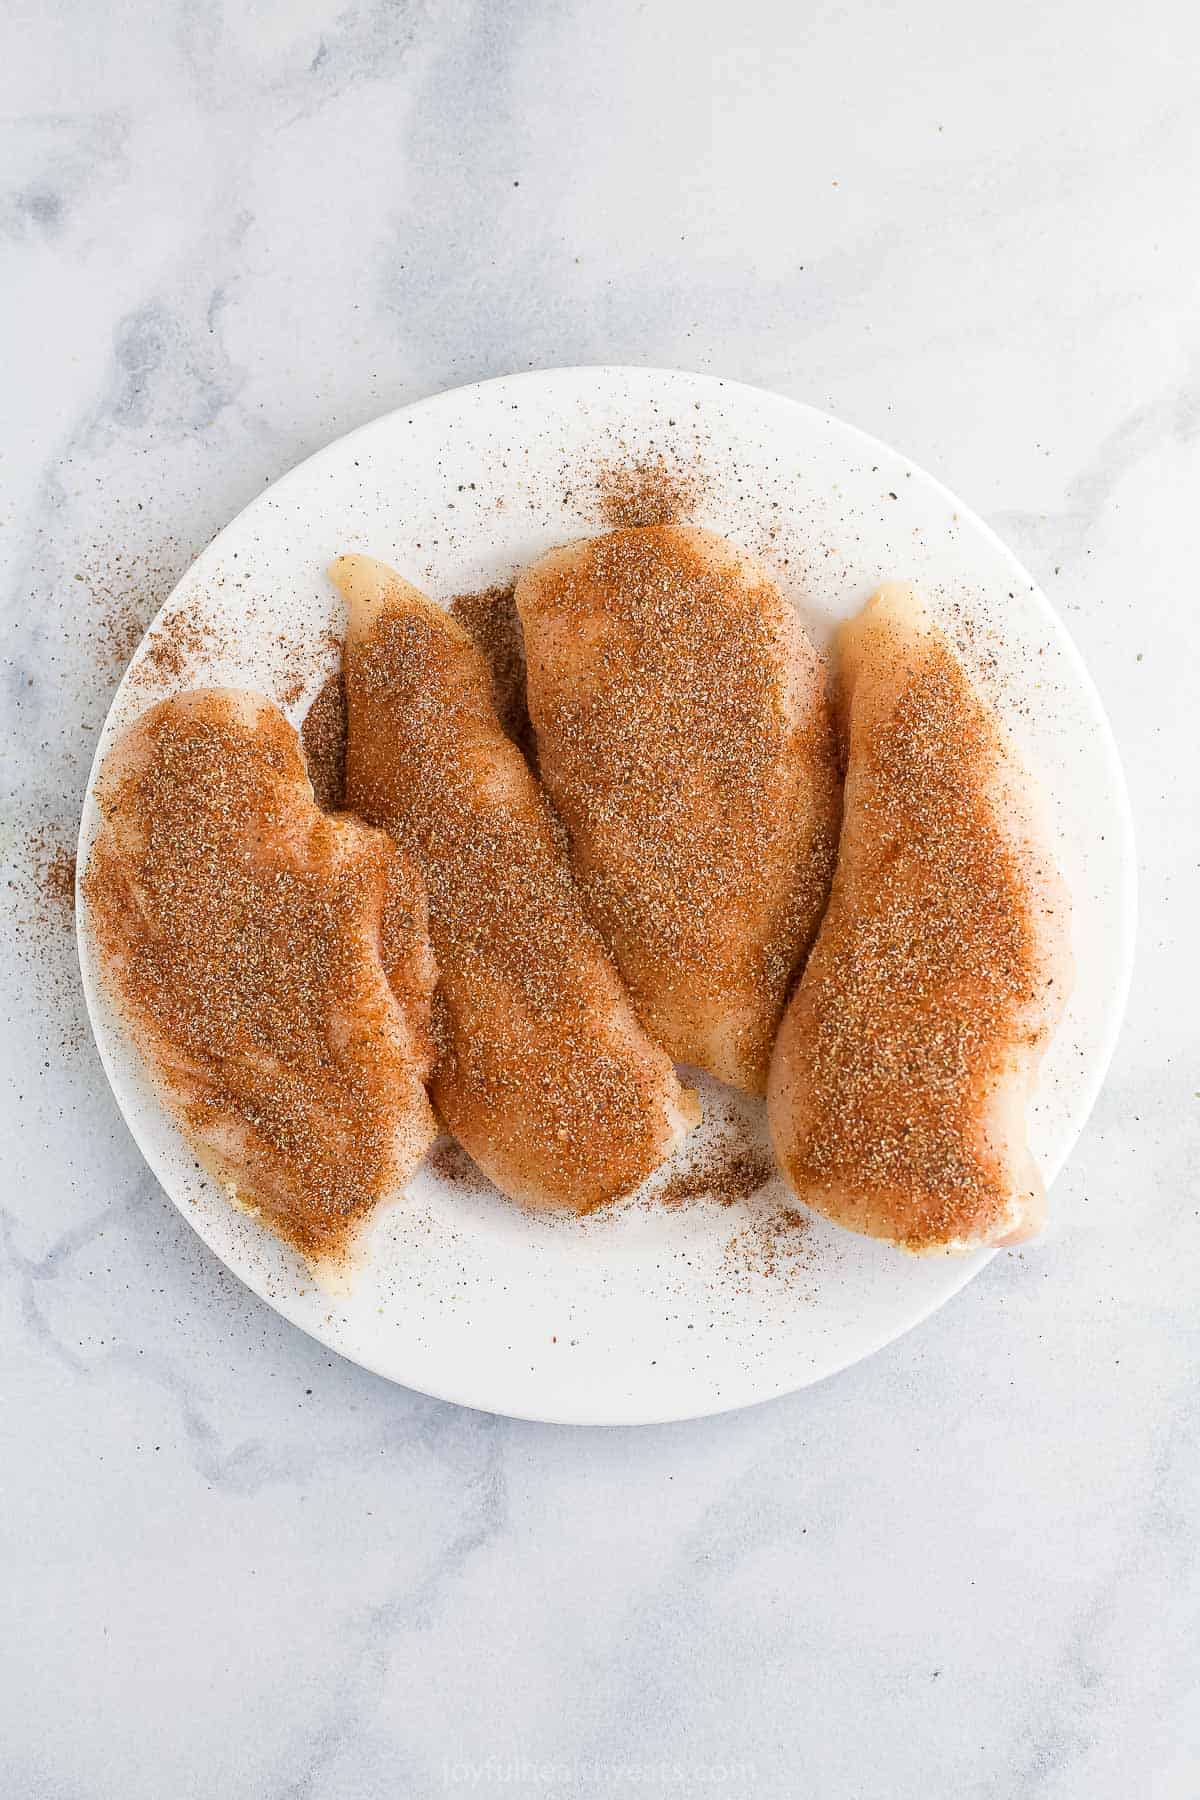 Chicken breasts with chipotle spice rub on a white plate